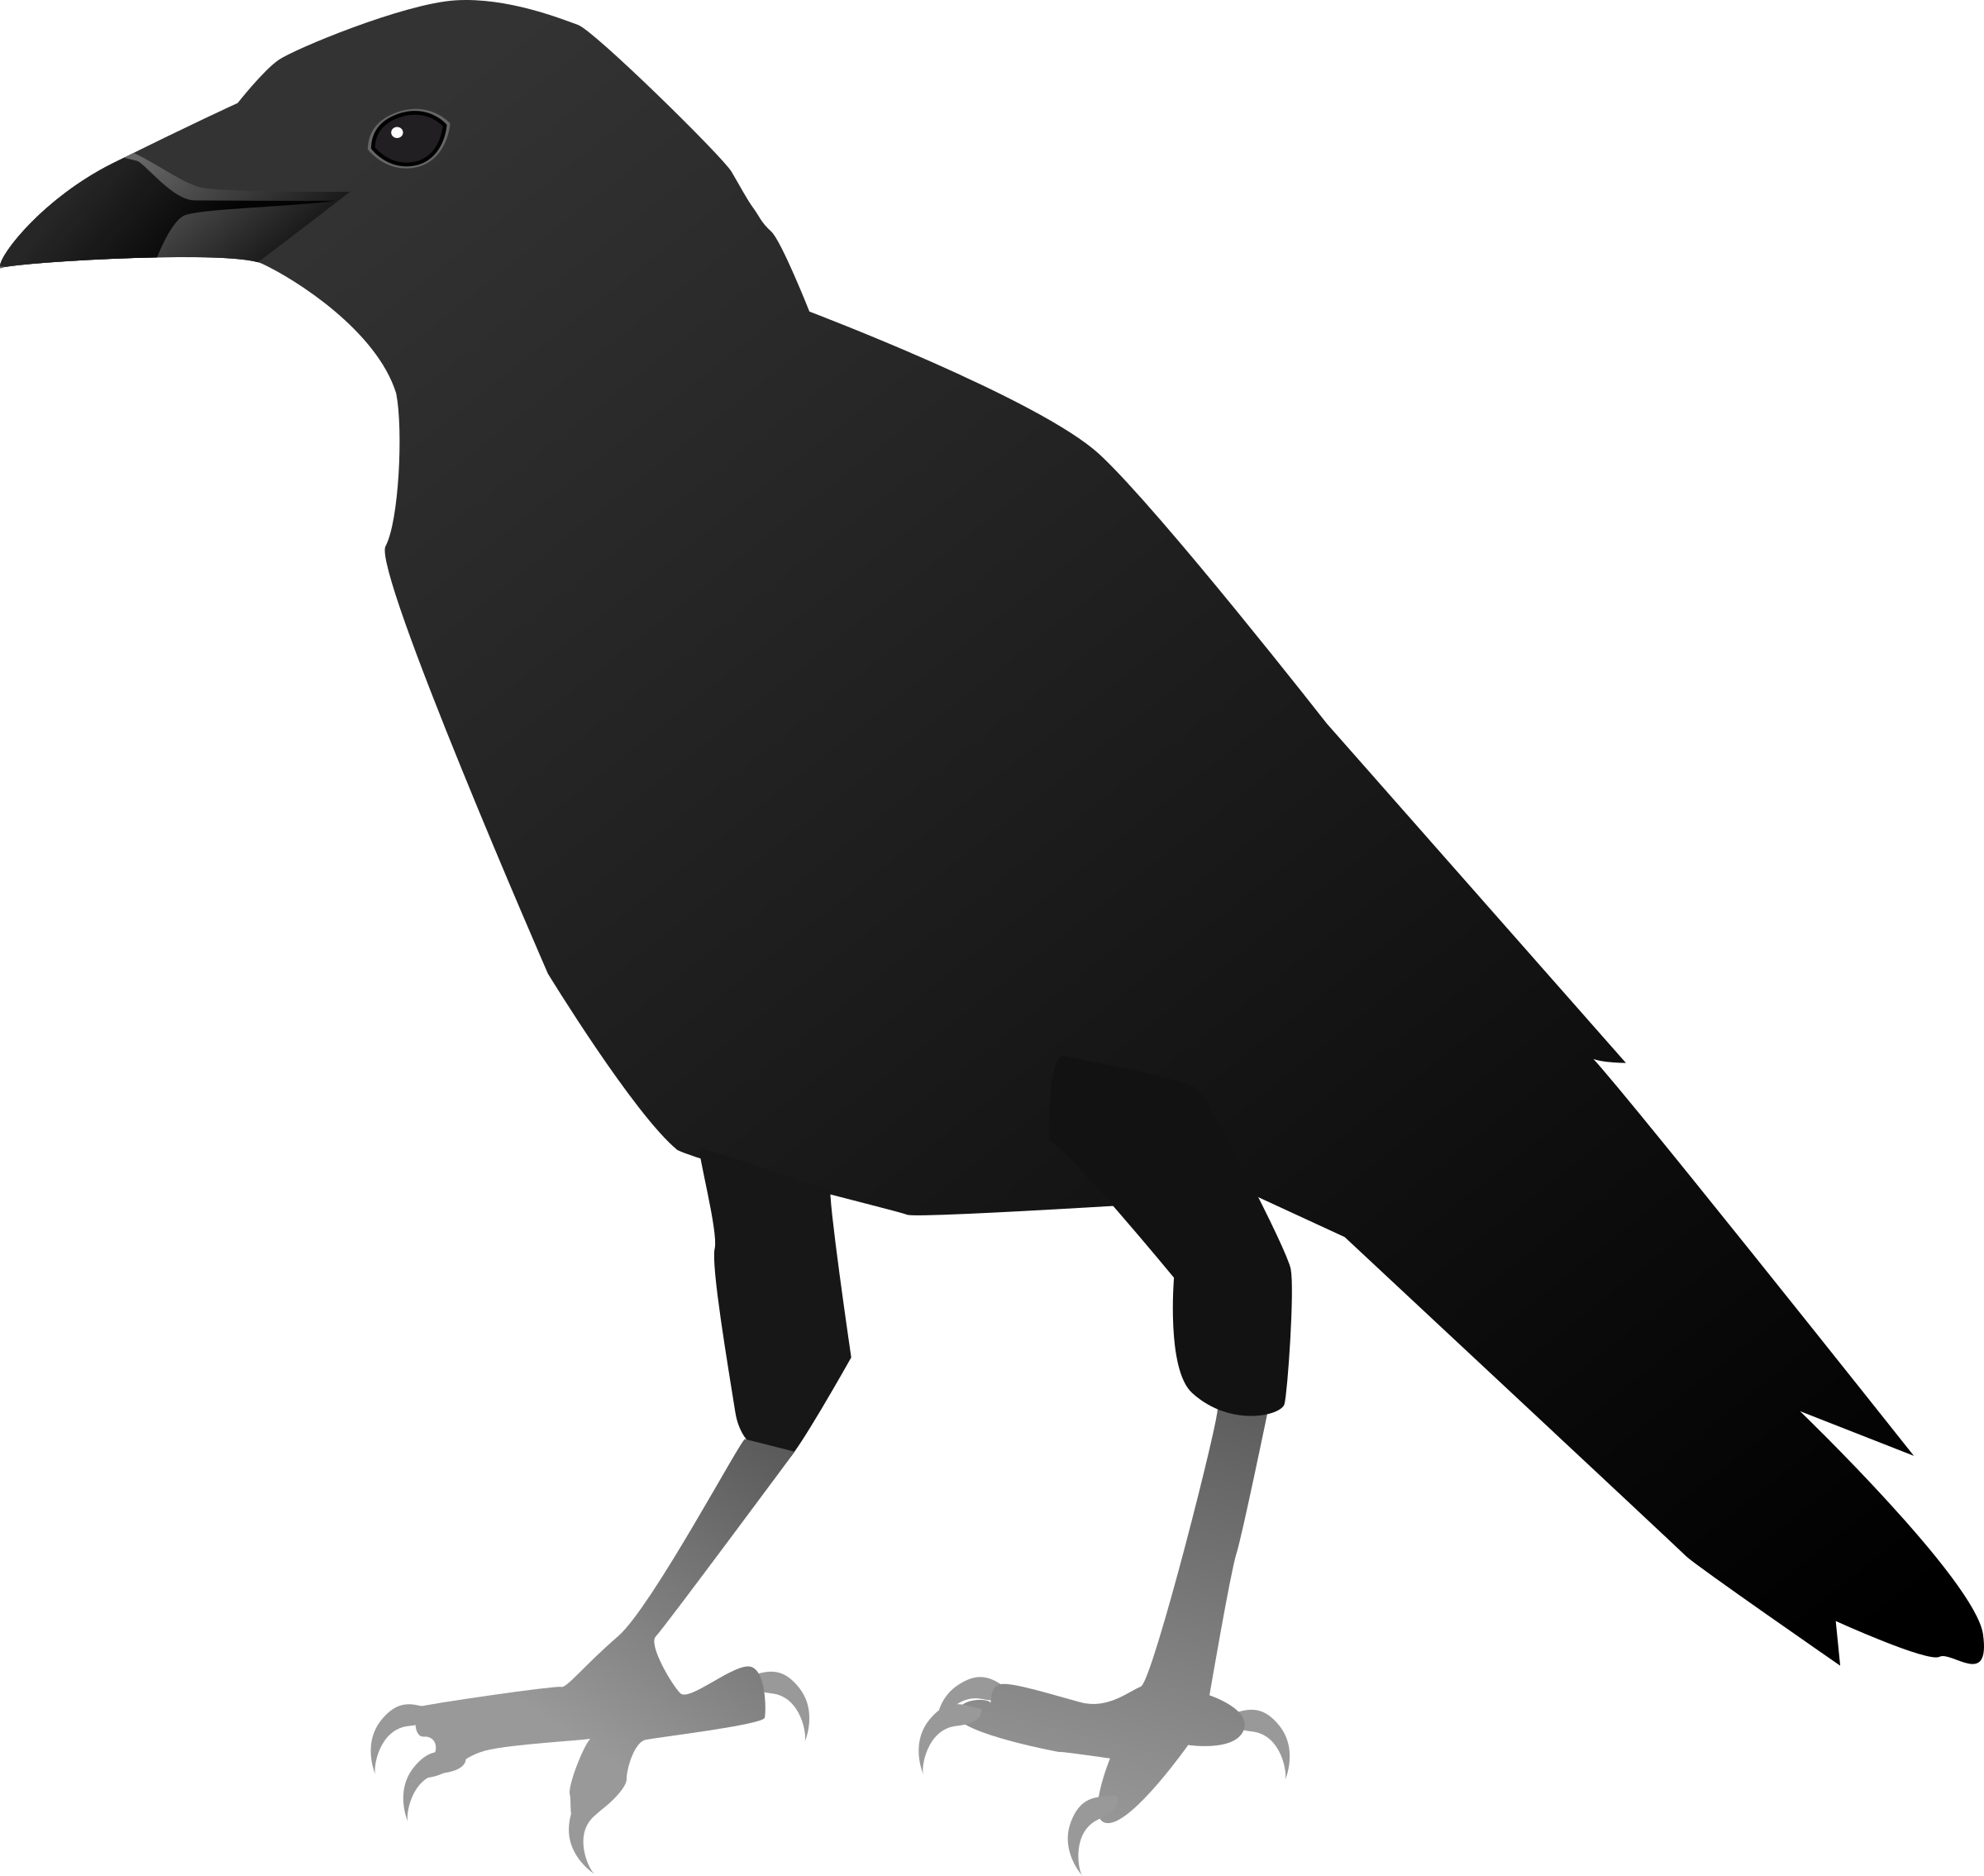 . Feathers clipart crow